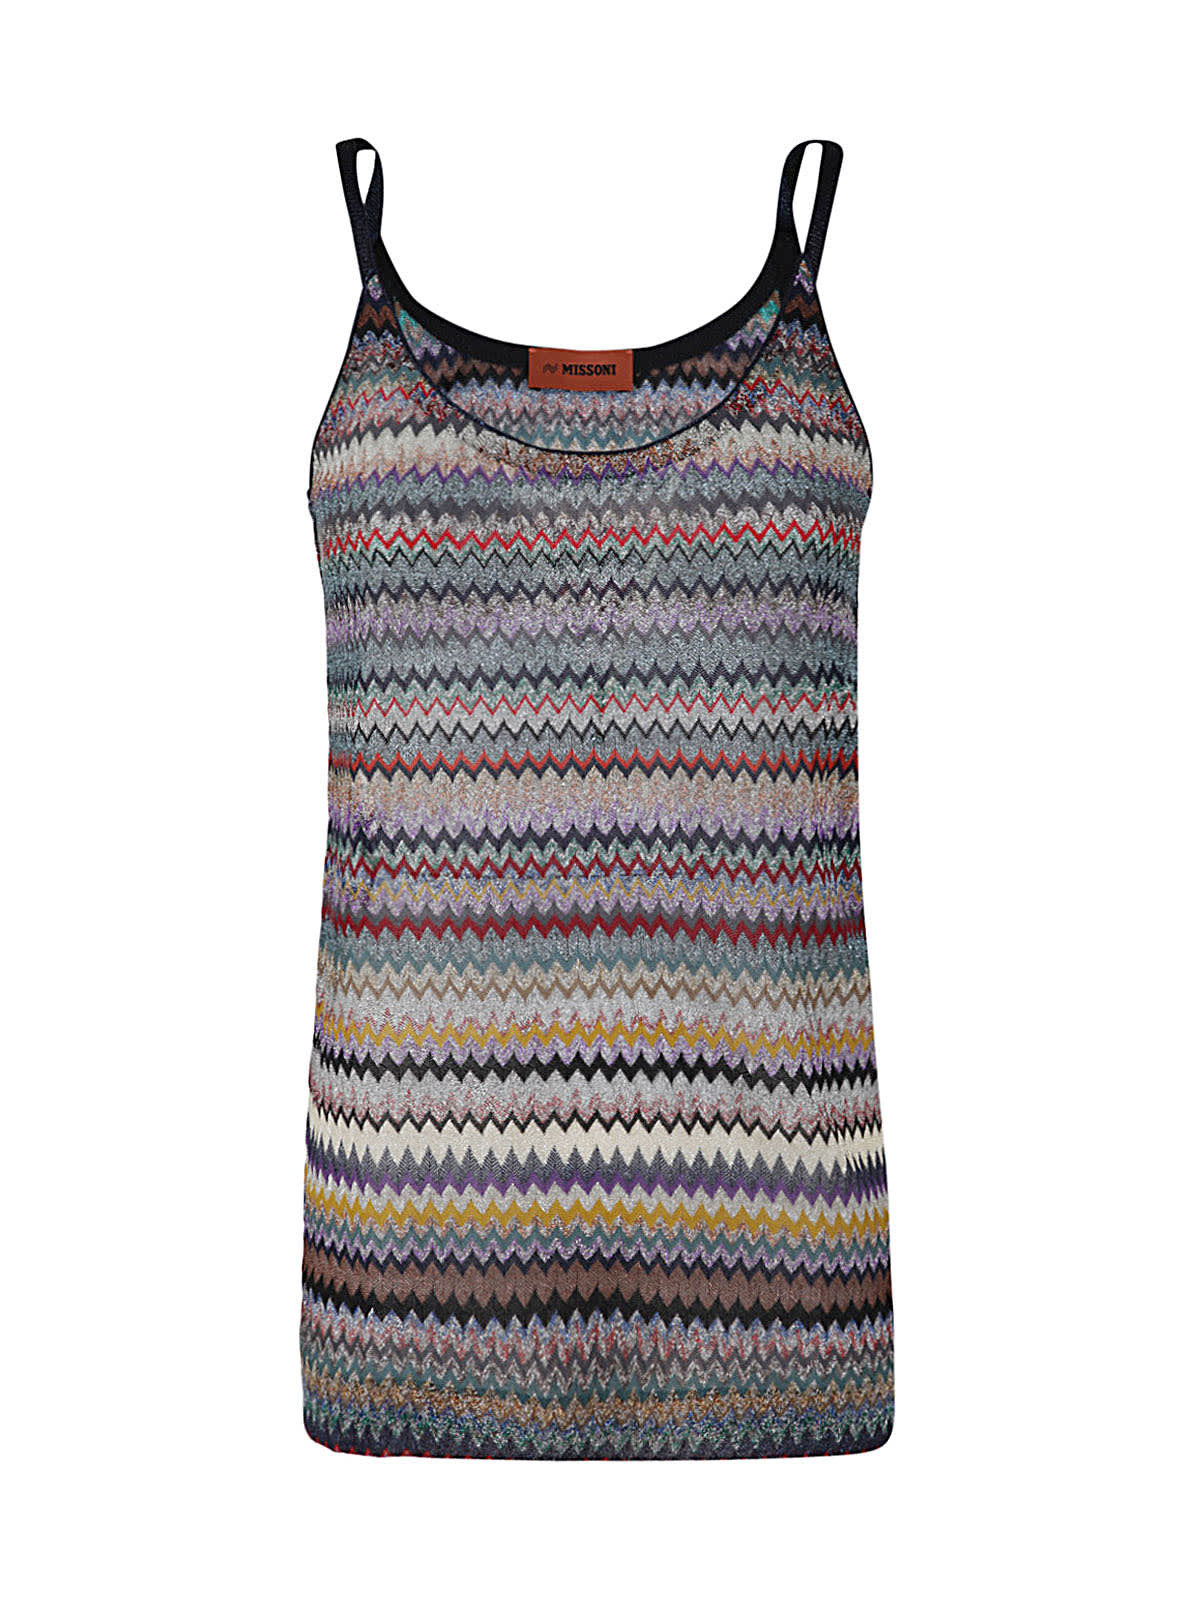 Missoni Knitted Top